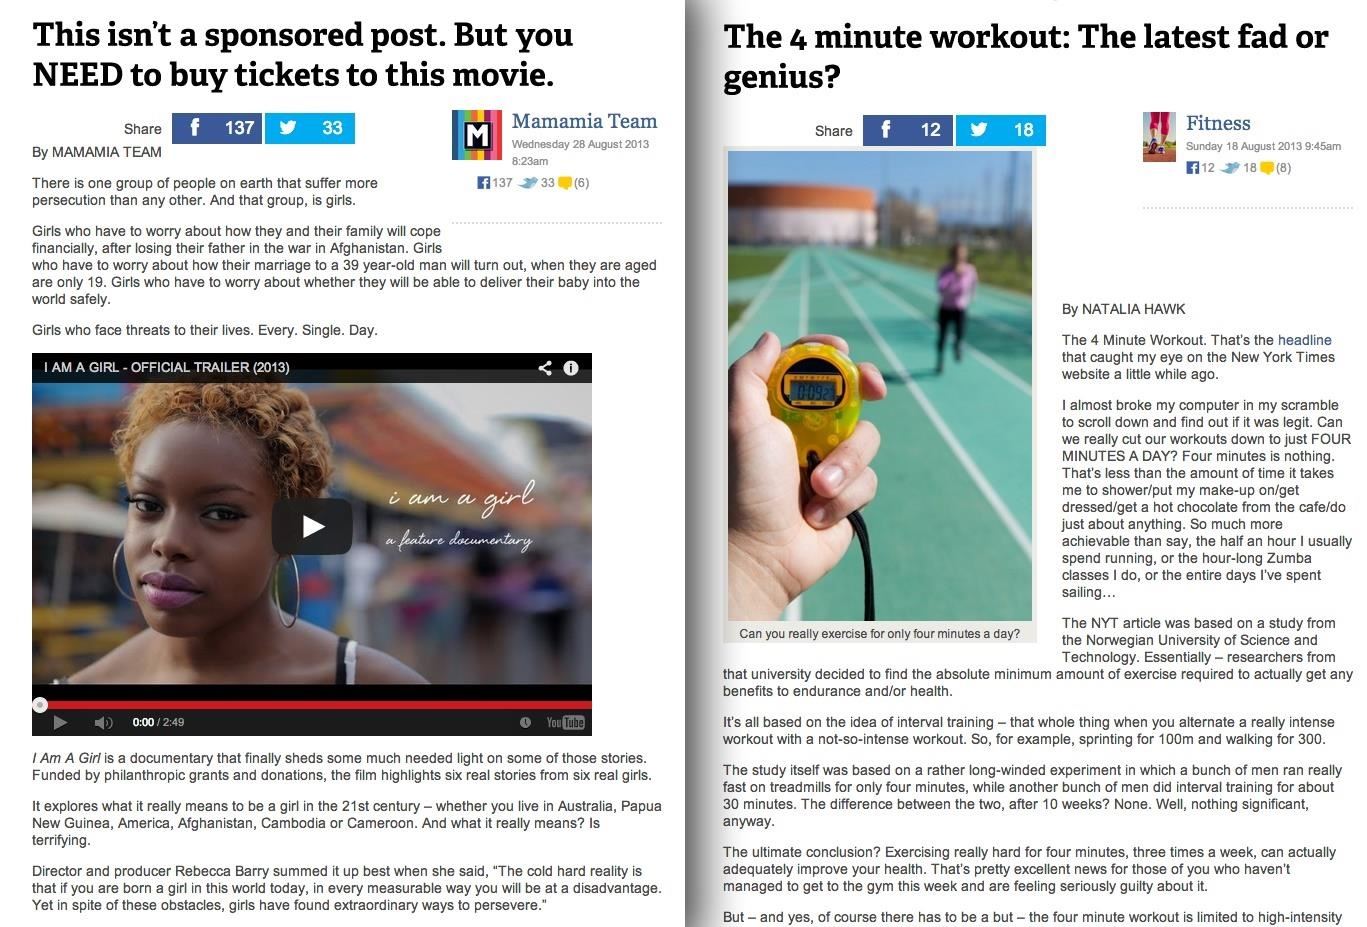 How to Stop Being Duped by BuzzFeed, Upworthy, & Other Headline Clickbaiters